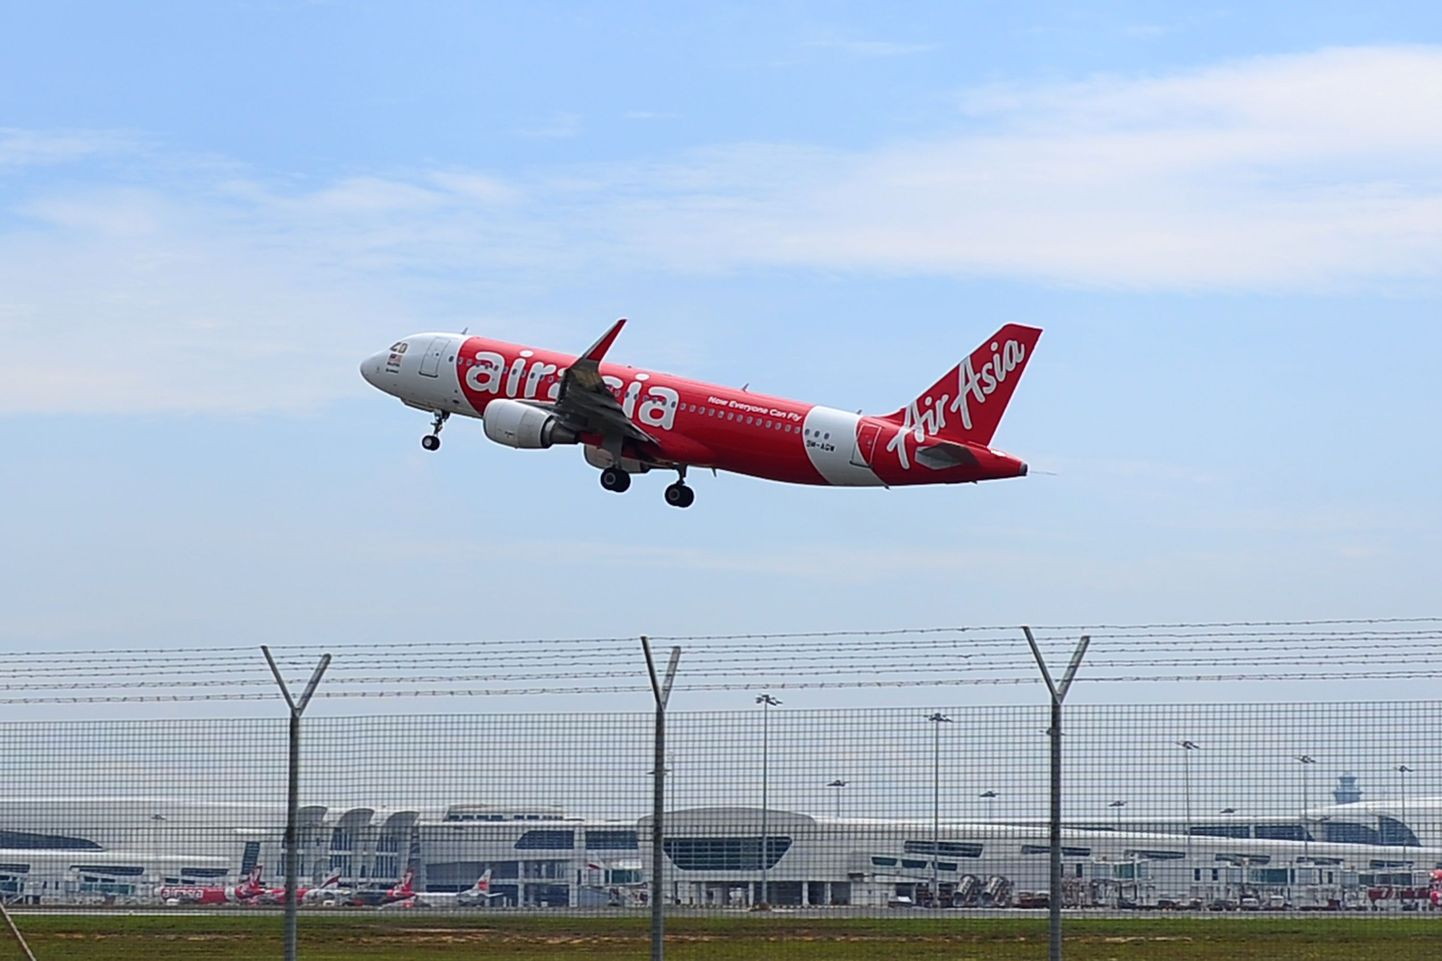 In this May 9, 2014 photo, an Air Asia A320-200 plane takes off from Kuala Lumpur International Airport 2 in Sepang, Malaysia. An AirAsia plane with 161 people on board lost contact with ground control on Sunday, Dec. 28, 2014,  while flying over the Java Sea after taking off from a provincial city in Indonesia for Singapore, and search and rescue operations were underway.  AirAsia, a regional low-cost carrier with presence in several Southeast Asian countries, said in a statement that the missing plane was an Airbus A320-200 and that search and rescue operations were in progress. The plane in this photo is the same model but not the one which went missing in Indonesia Sunday.  (AP Photo/Joshua Paul)